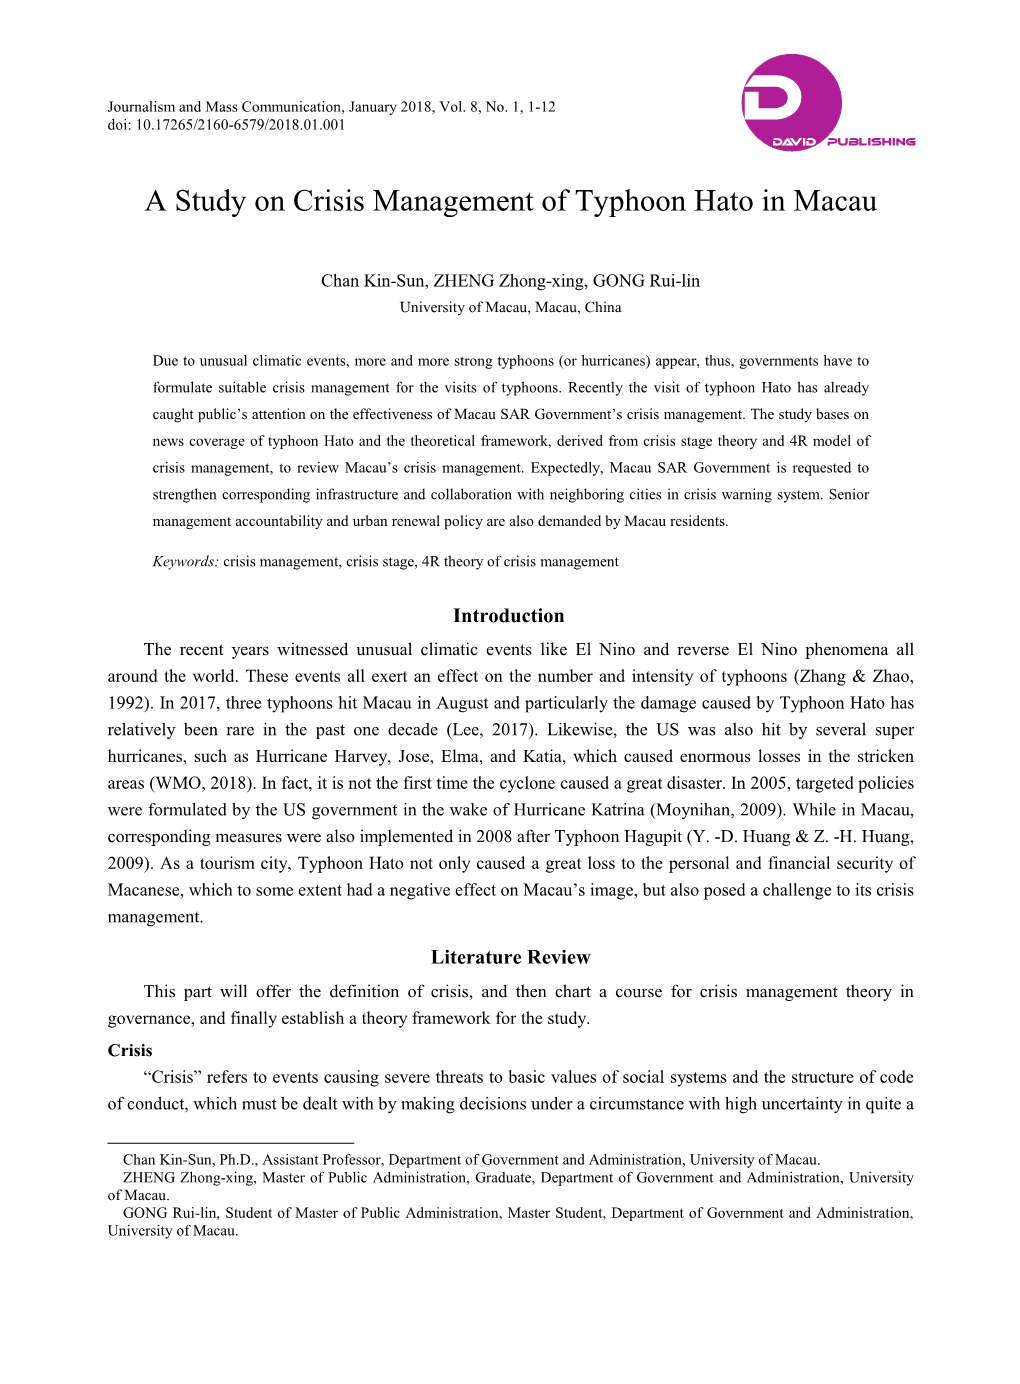 A Study on Crisis Management of Typhoon Hato in Macau